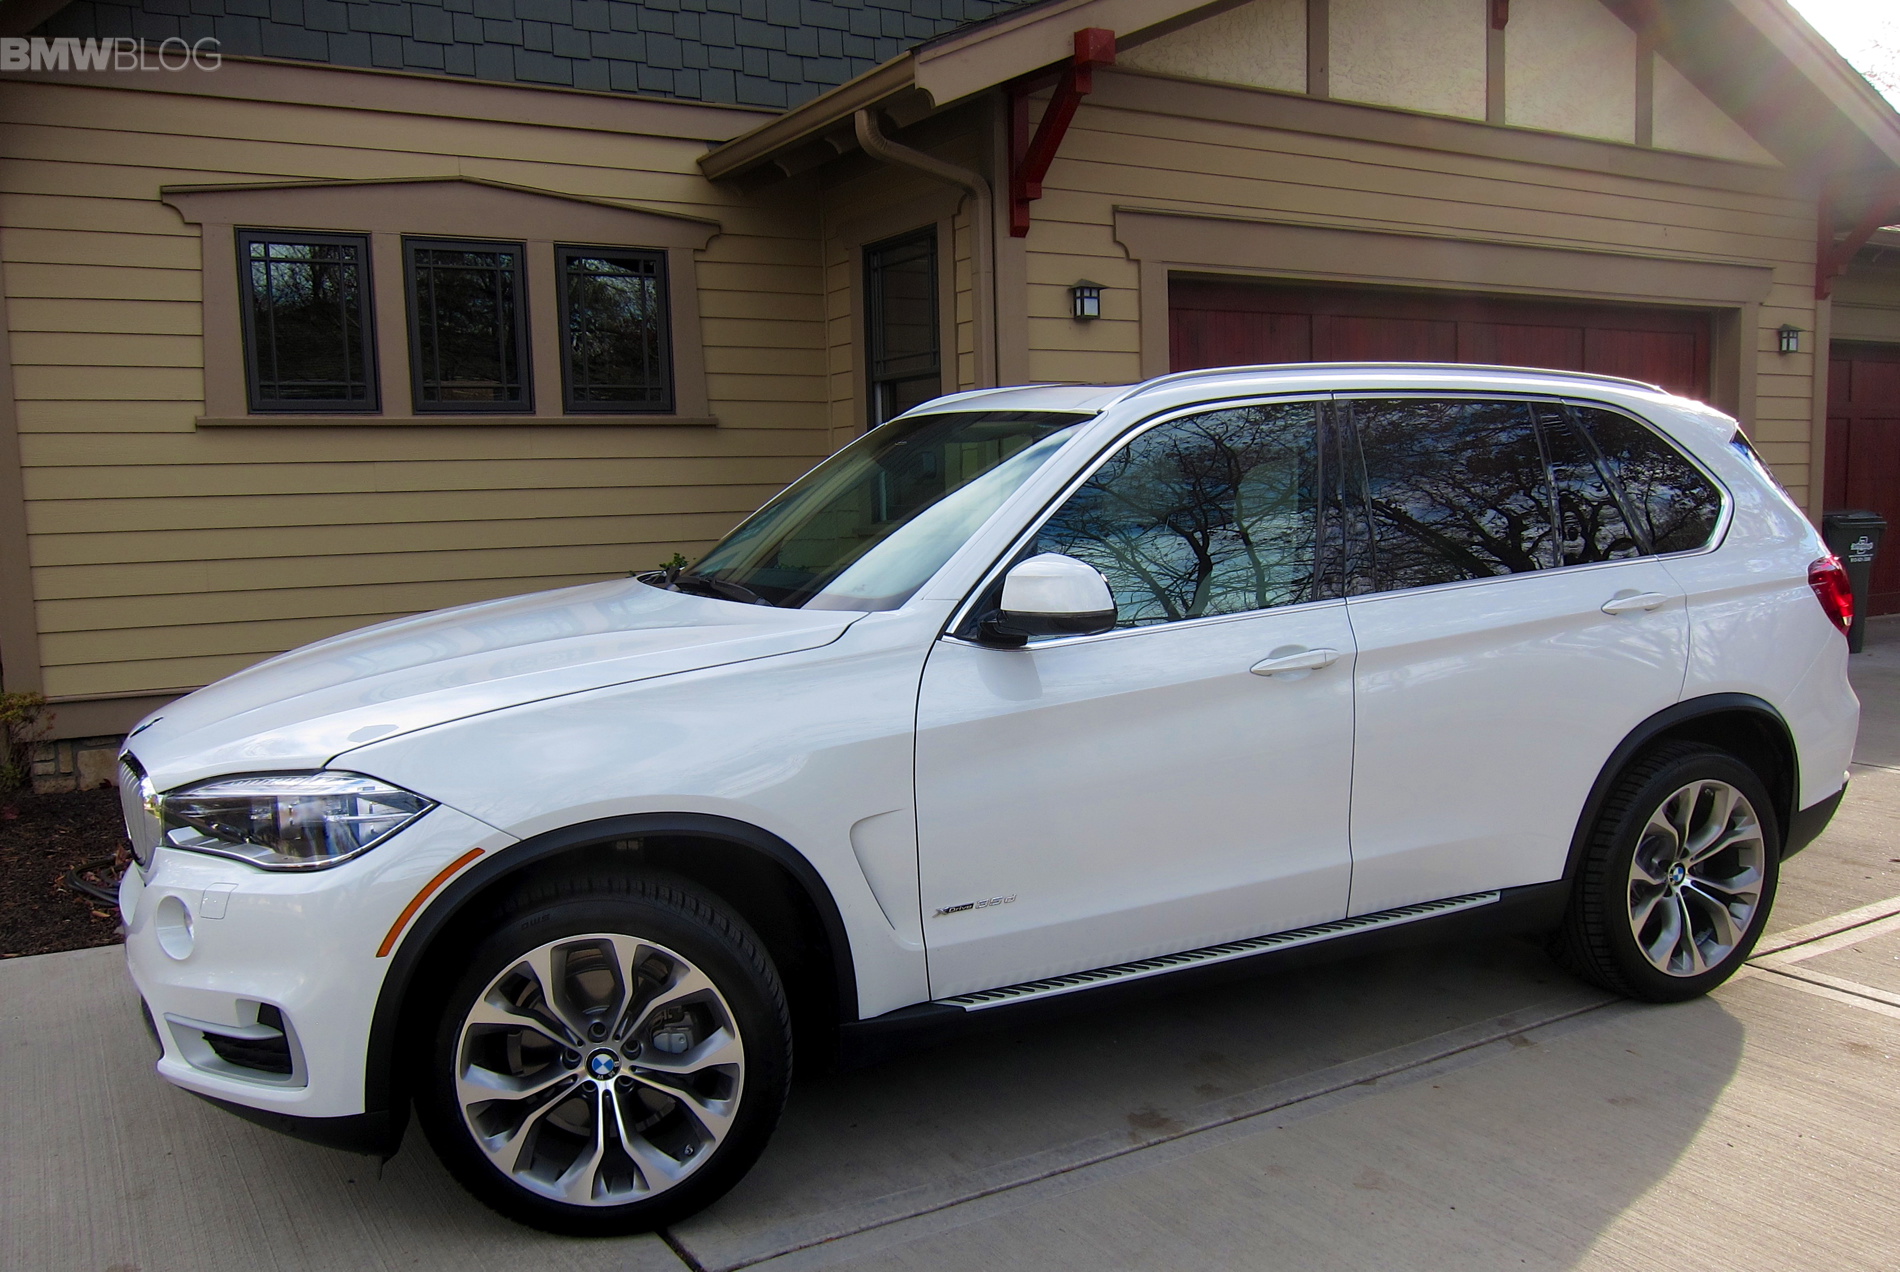 Temporary hold on the BMW X5 xDrive35d production for U.S.